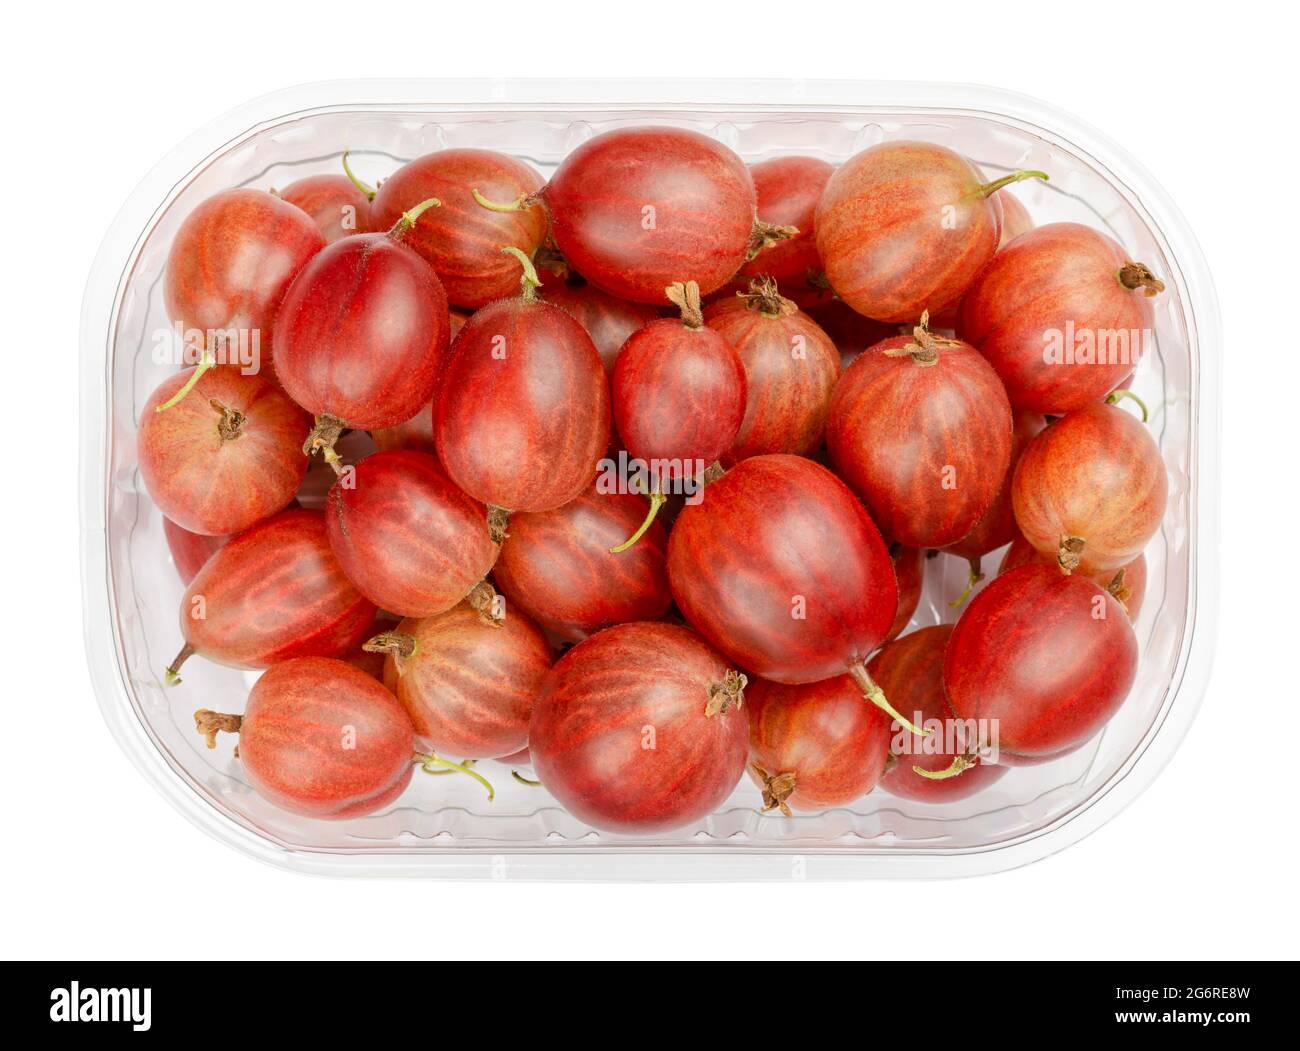 Red gooseberries in a plastic container. Fresh and ripe berries, fruits of Ribes uva-crispa, also European gooseberry, with a sourish sweet taste. Stock Photo